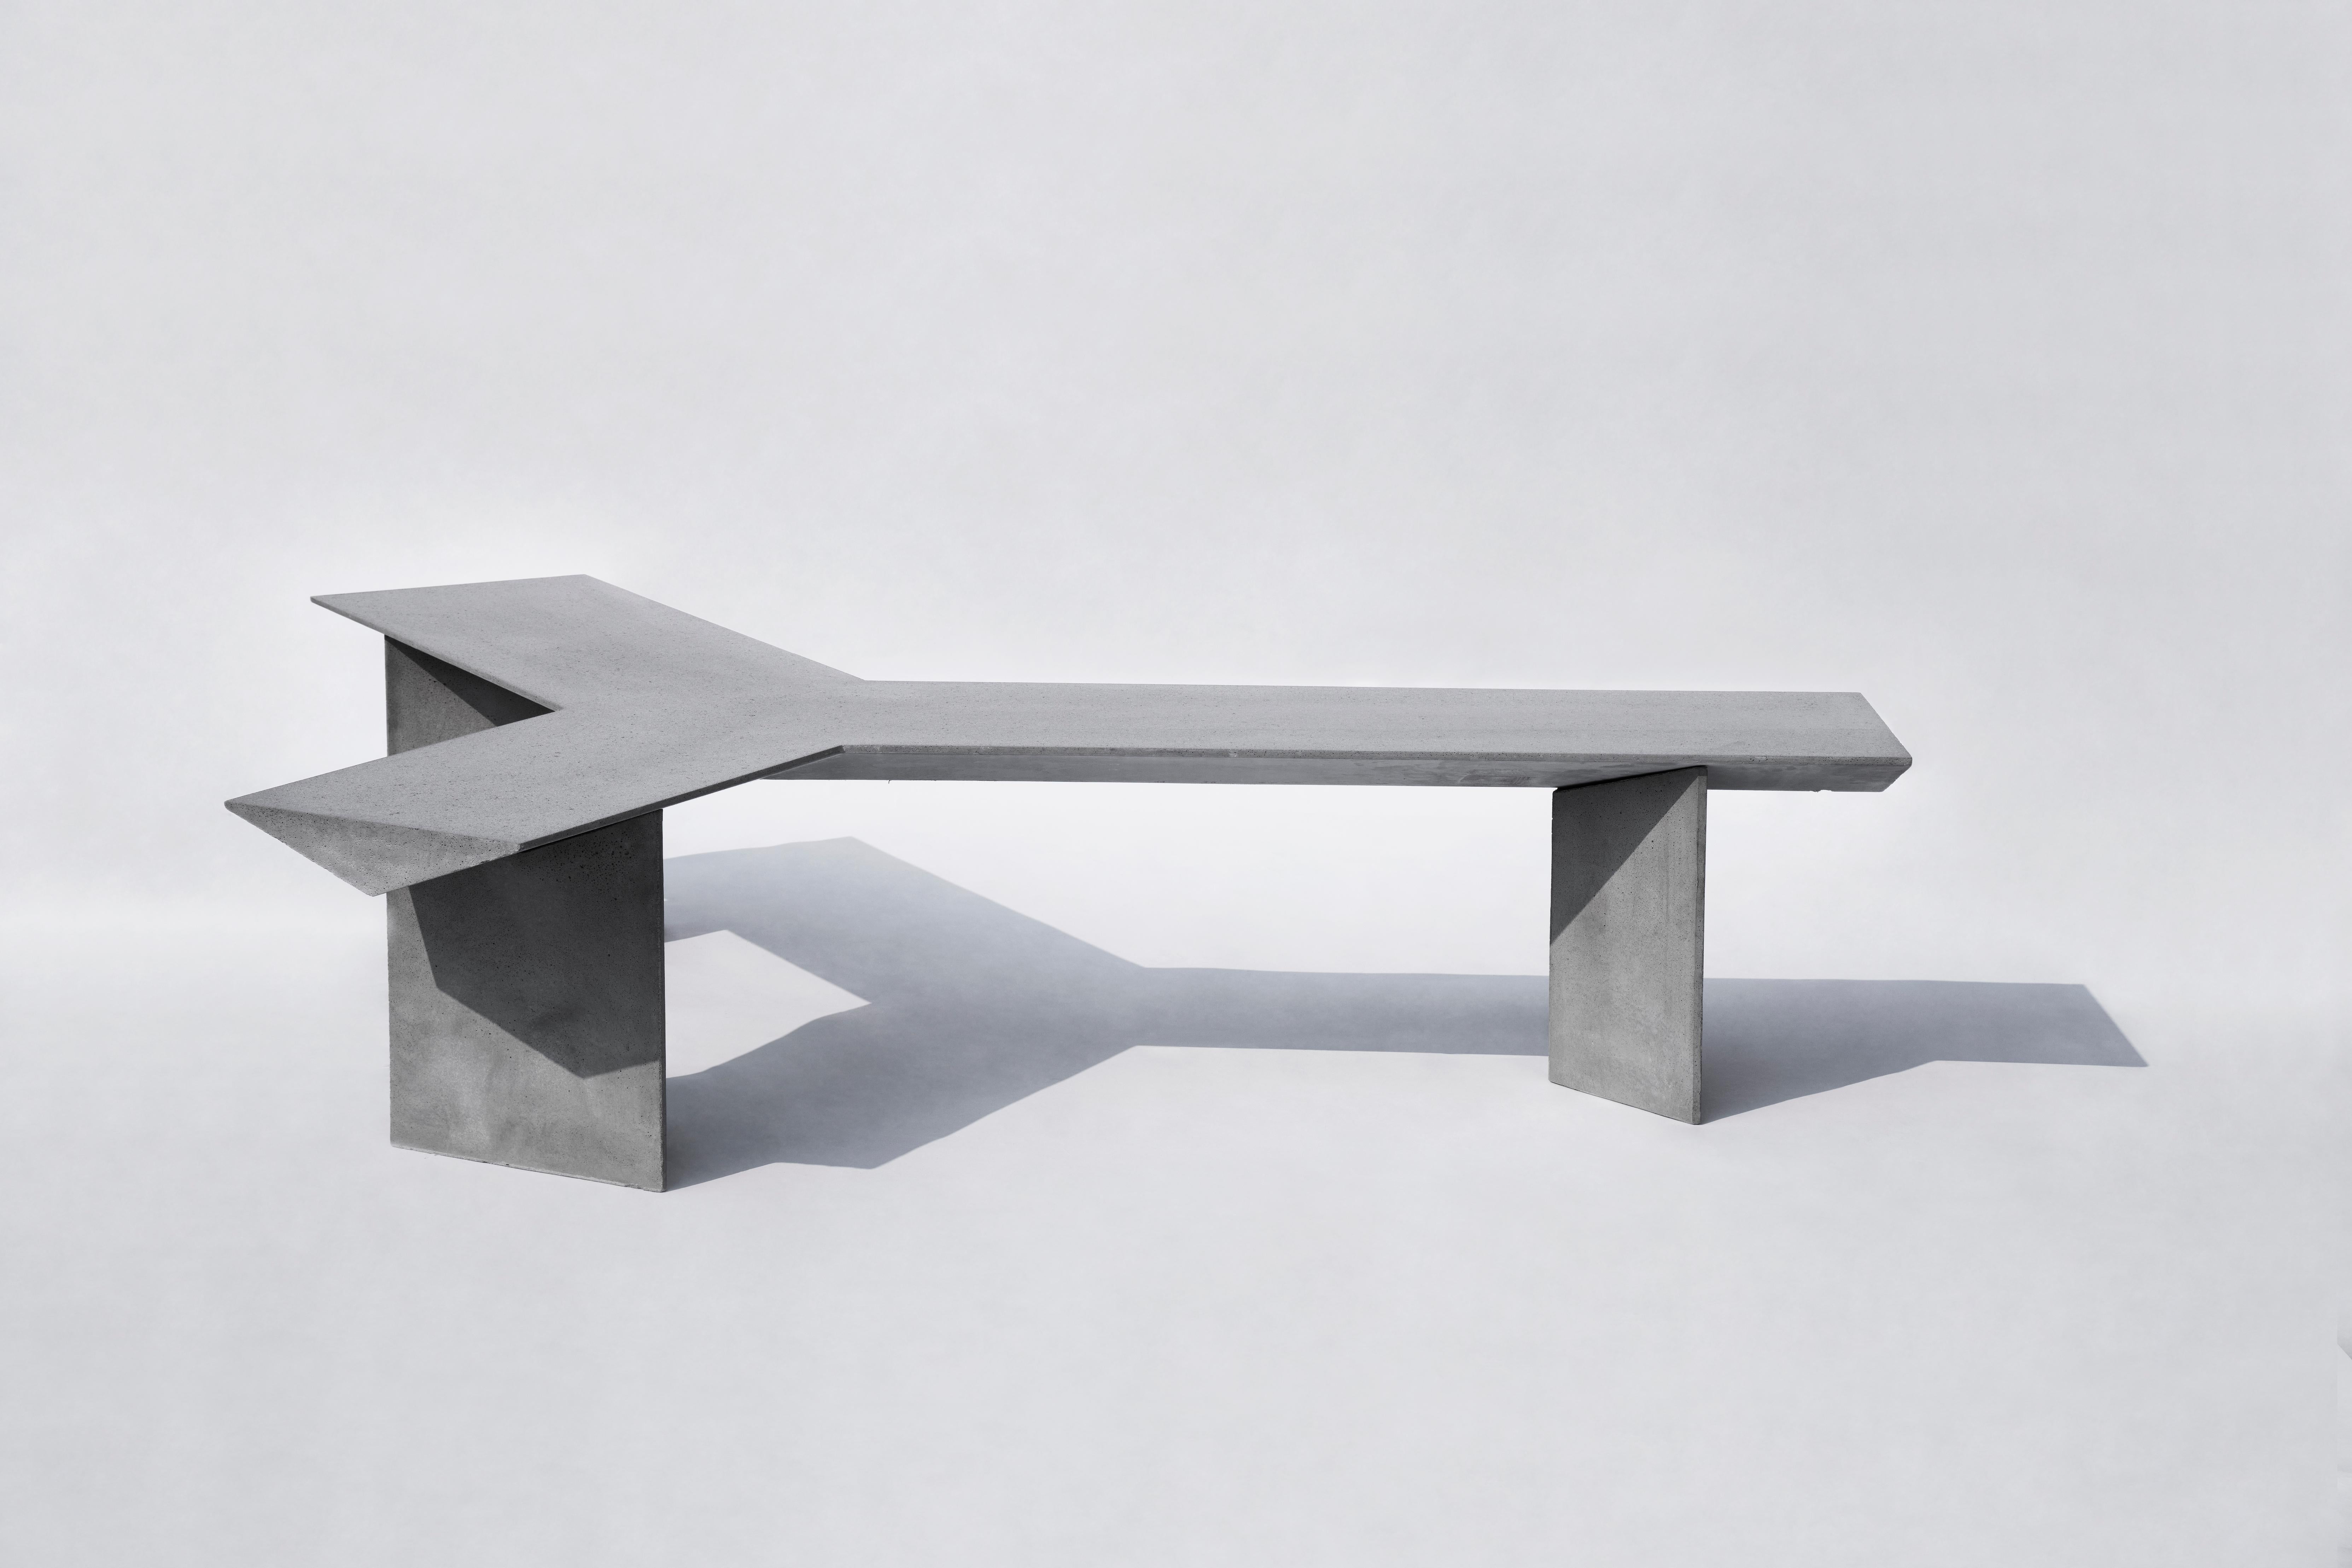 LIANG 2 Bench by Bentu Design

Concrete
Measures: 2045×1700×445 mm 
206 kg
Outdoor use: OK

Module bench: assemble LIANG 1 and LIANG 2 to create a sculptural bench.

--
Bentu Desing is a Guangzhou-based experimental design studio that